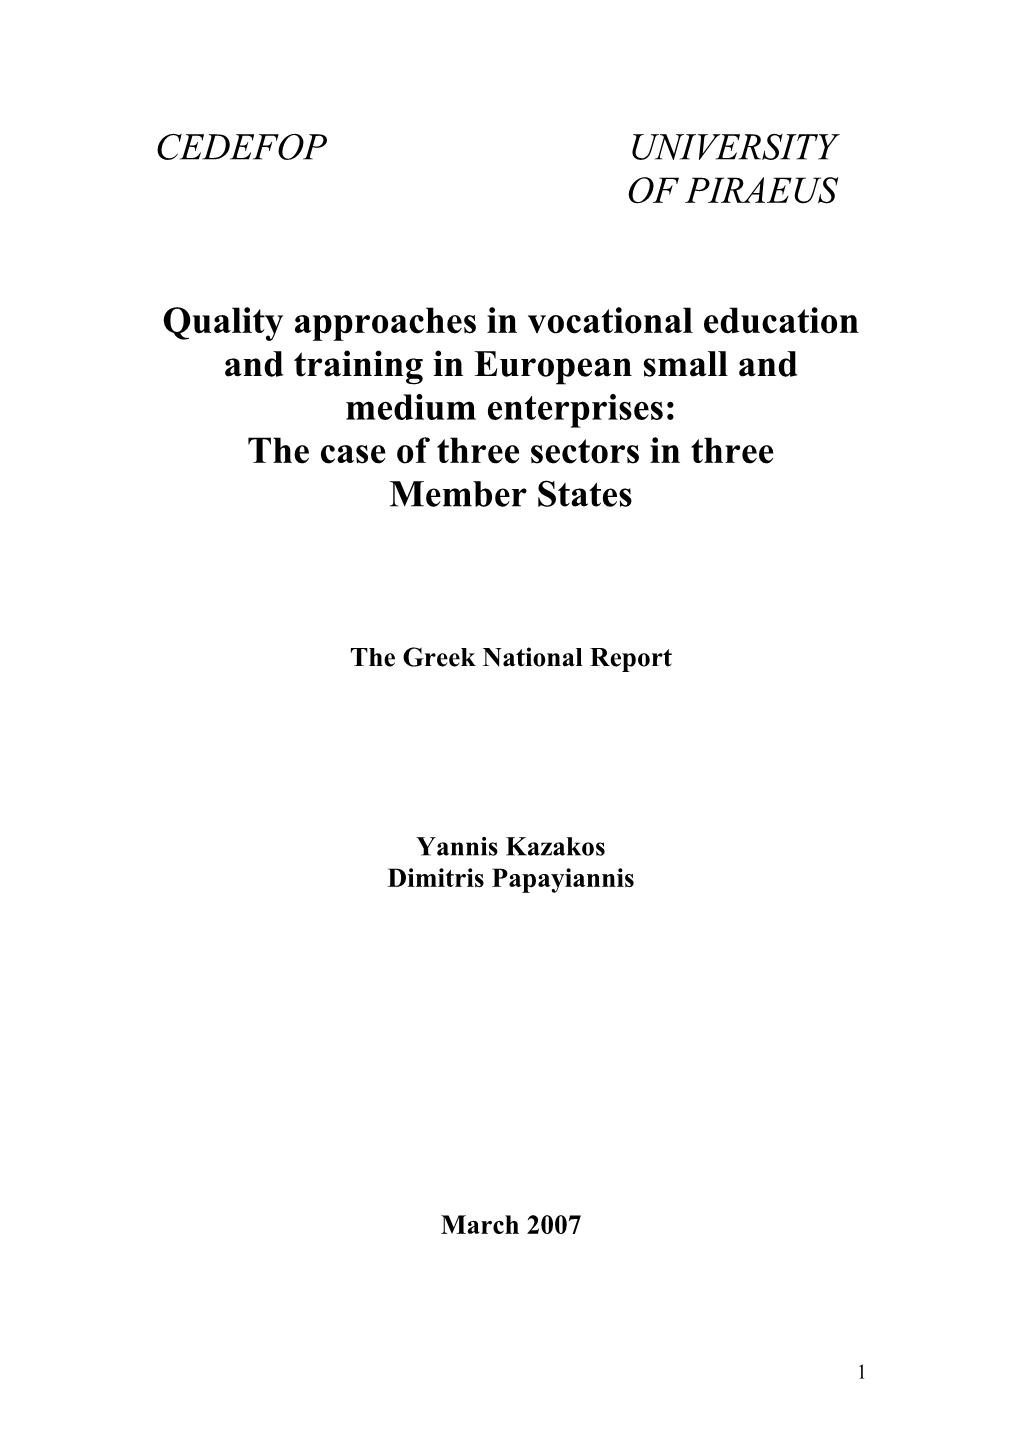 Quality Approaches in Vocational Education and Training in European Small and Medium